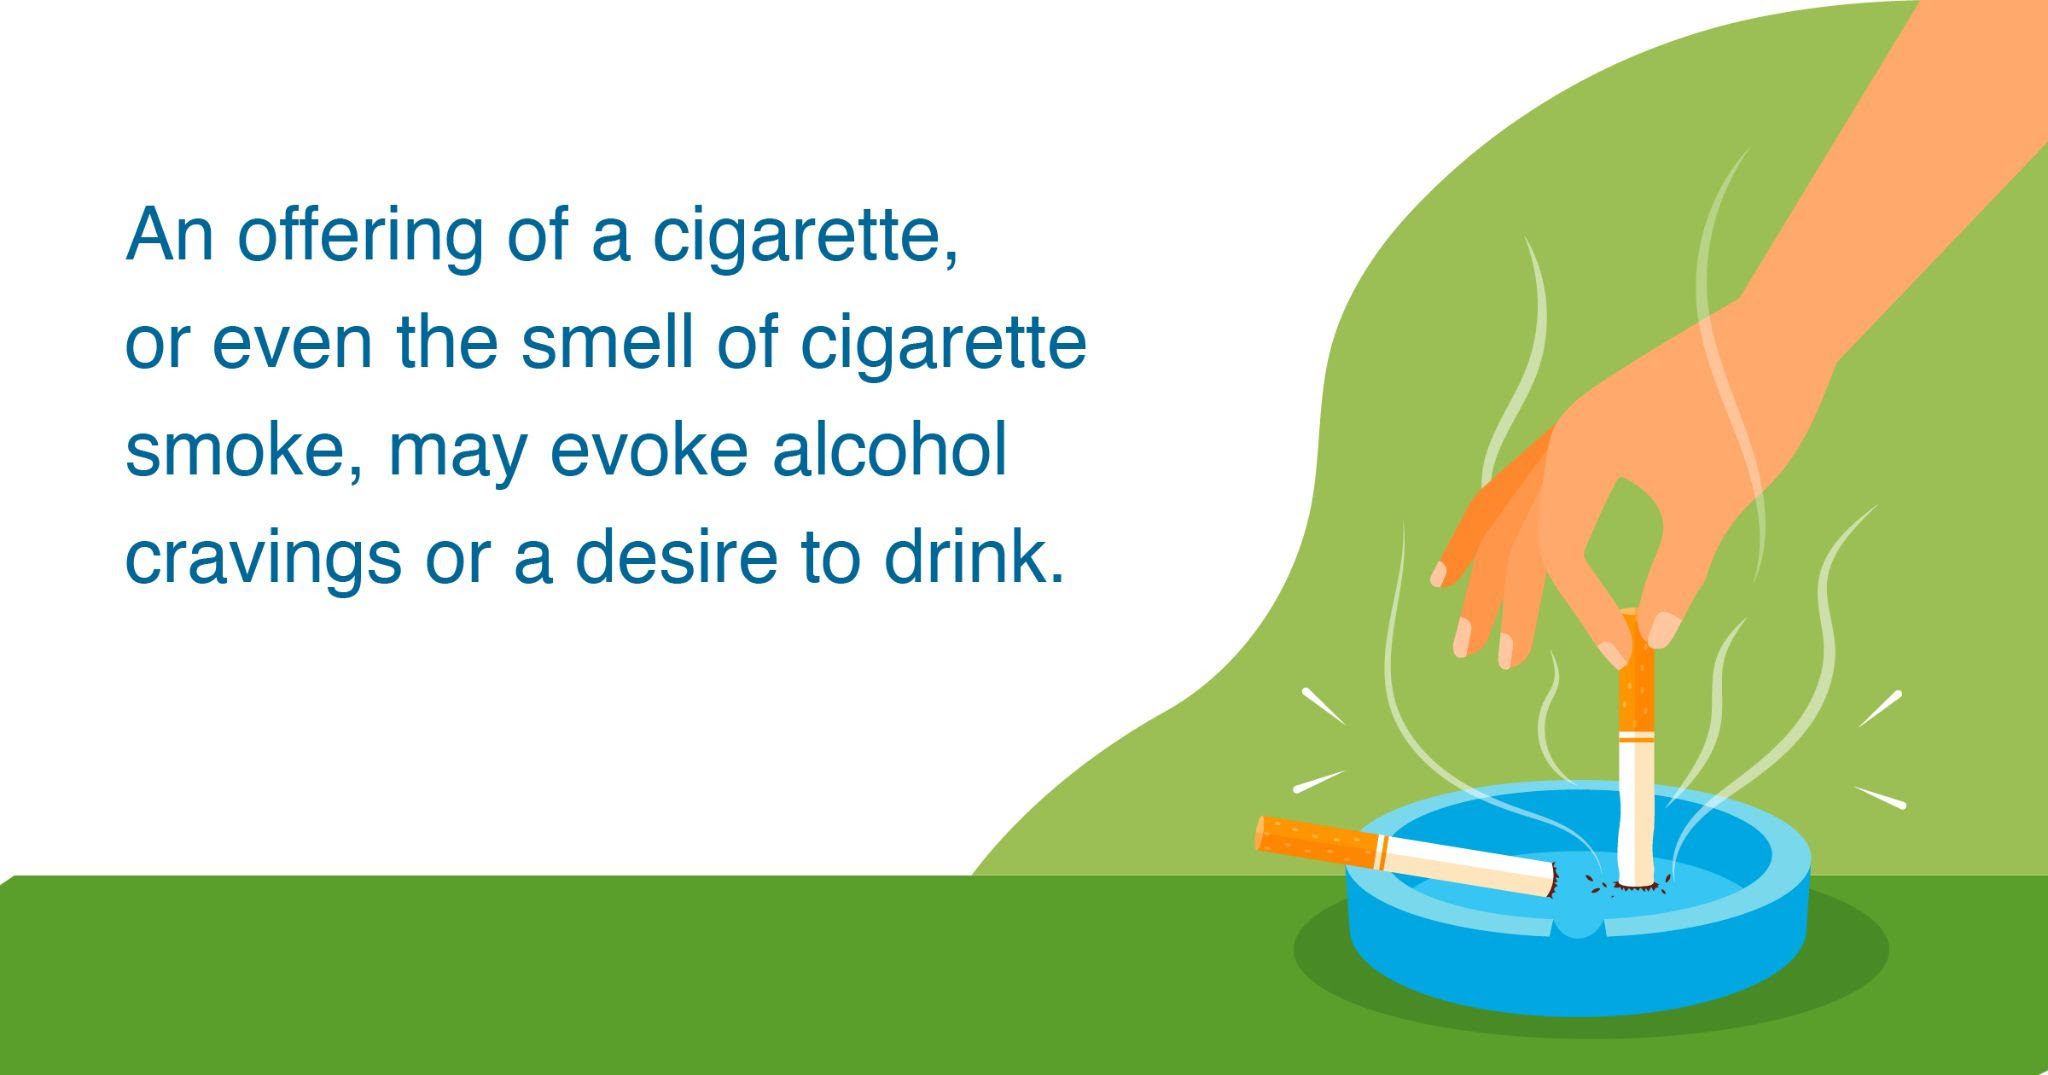 Cigarettes may cause the desire to drink alcohol